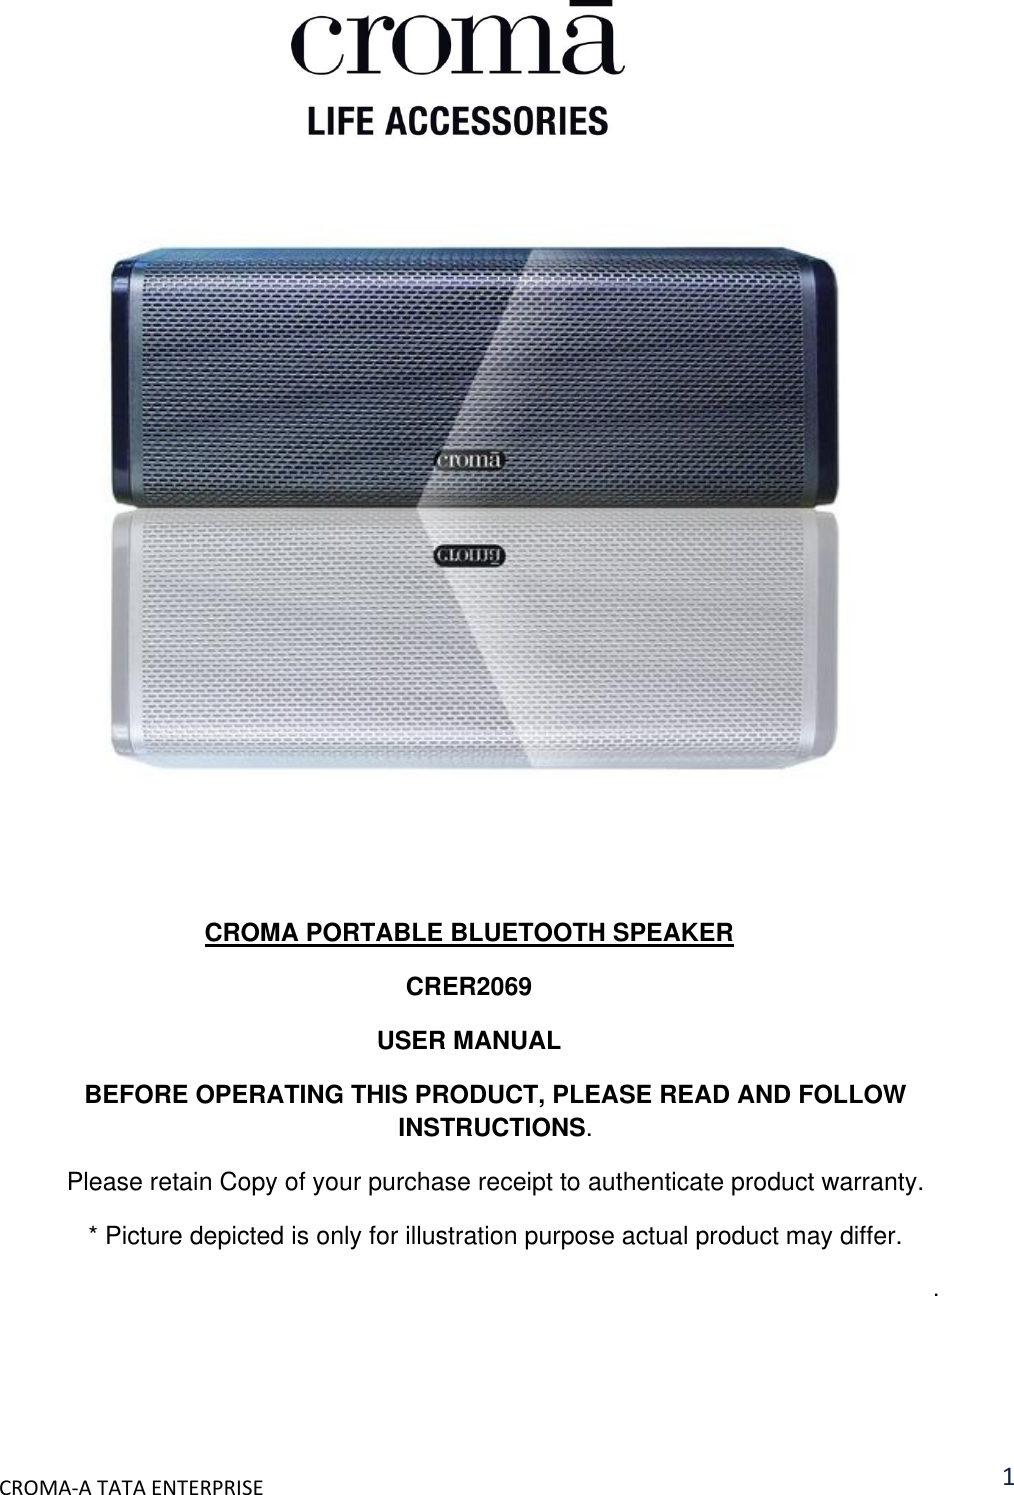  CROMA-A TATA ENTERPRISE 1          CROMA PORTABLE BLUETOOTH SPEAKER CRER2069 USER MANUAL BEFORE OPERATING THIS PRODUCT, PLEASE READ AND FOLLOW INSTRUCTIONS. Please retain Copy of your purchase receipt to authenticate product warranty. * Picture depicted is only for illustration purpose actual product may differ. . 